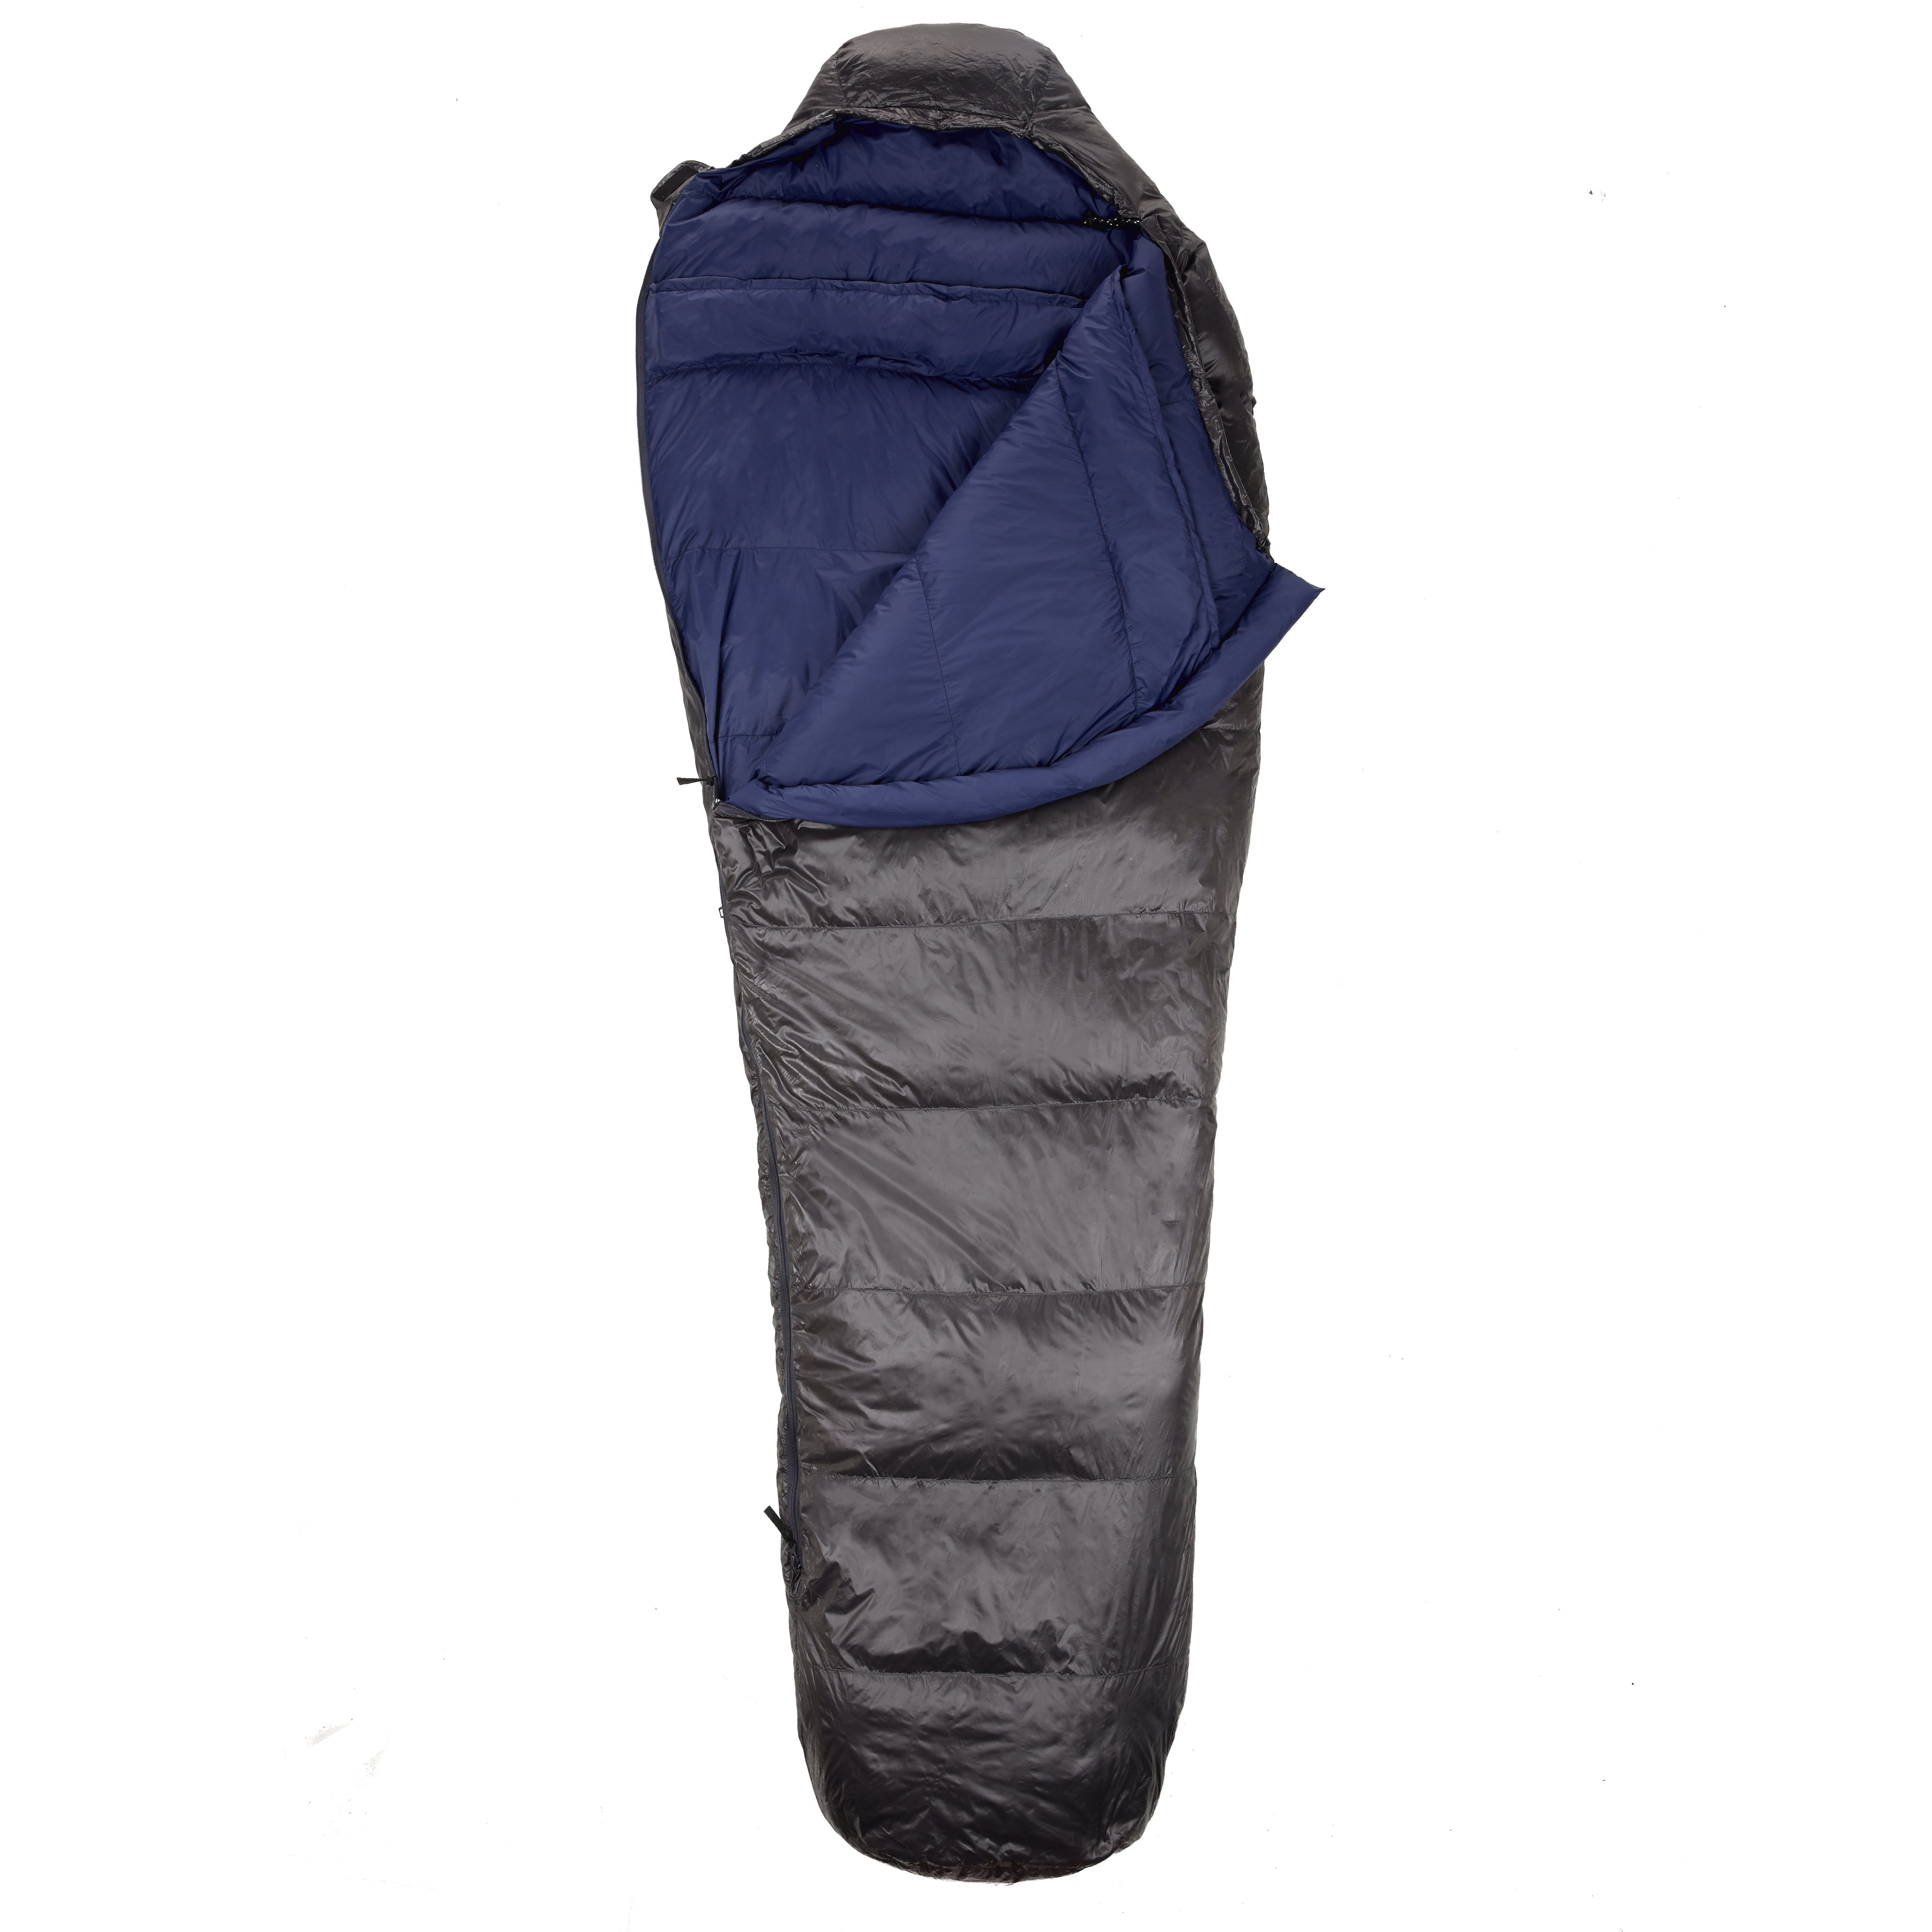 LITHIC 35-Degree Down Sleeping Bag - image 4 of 8